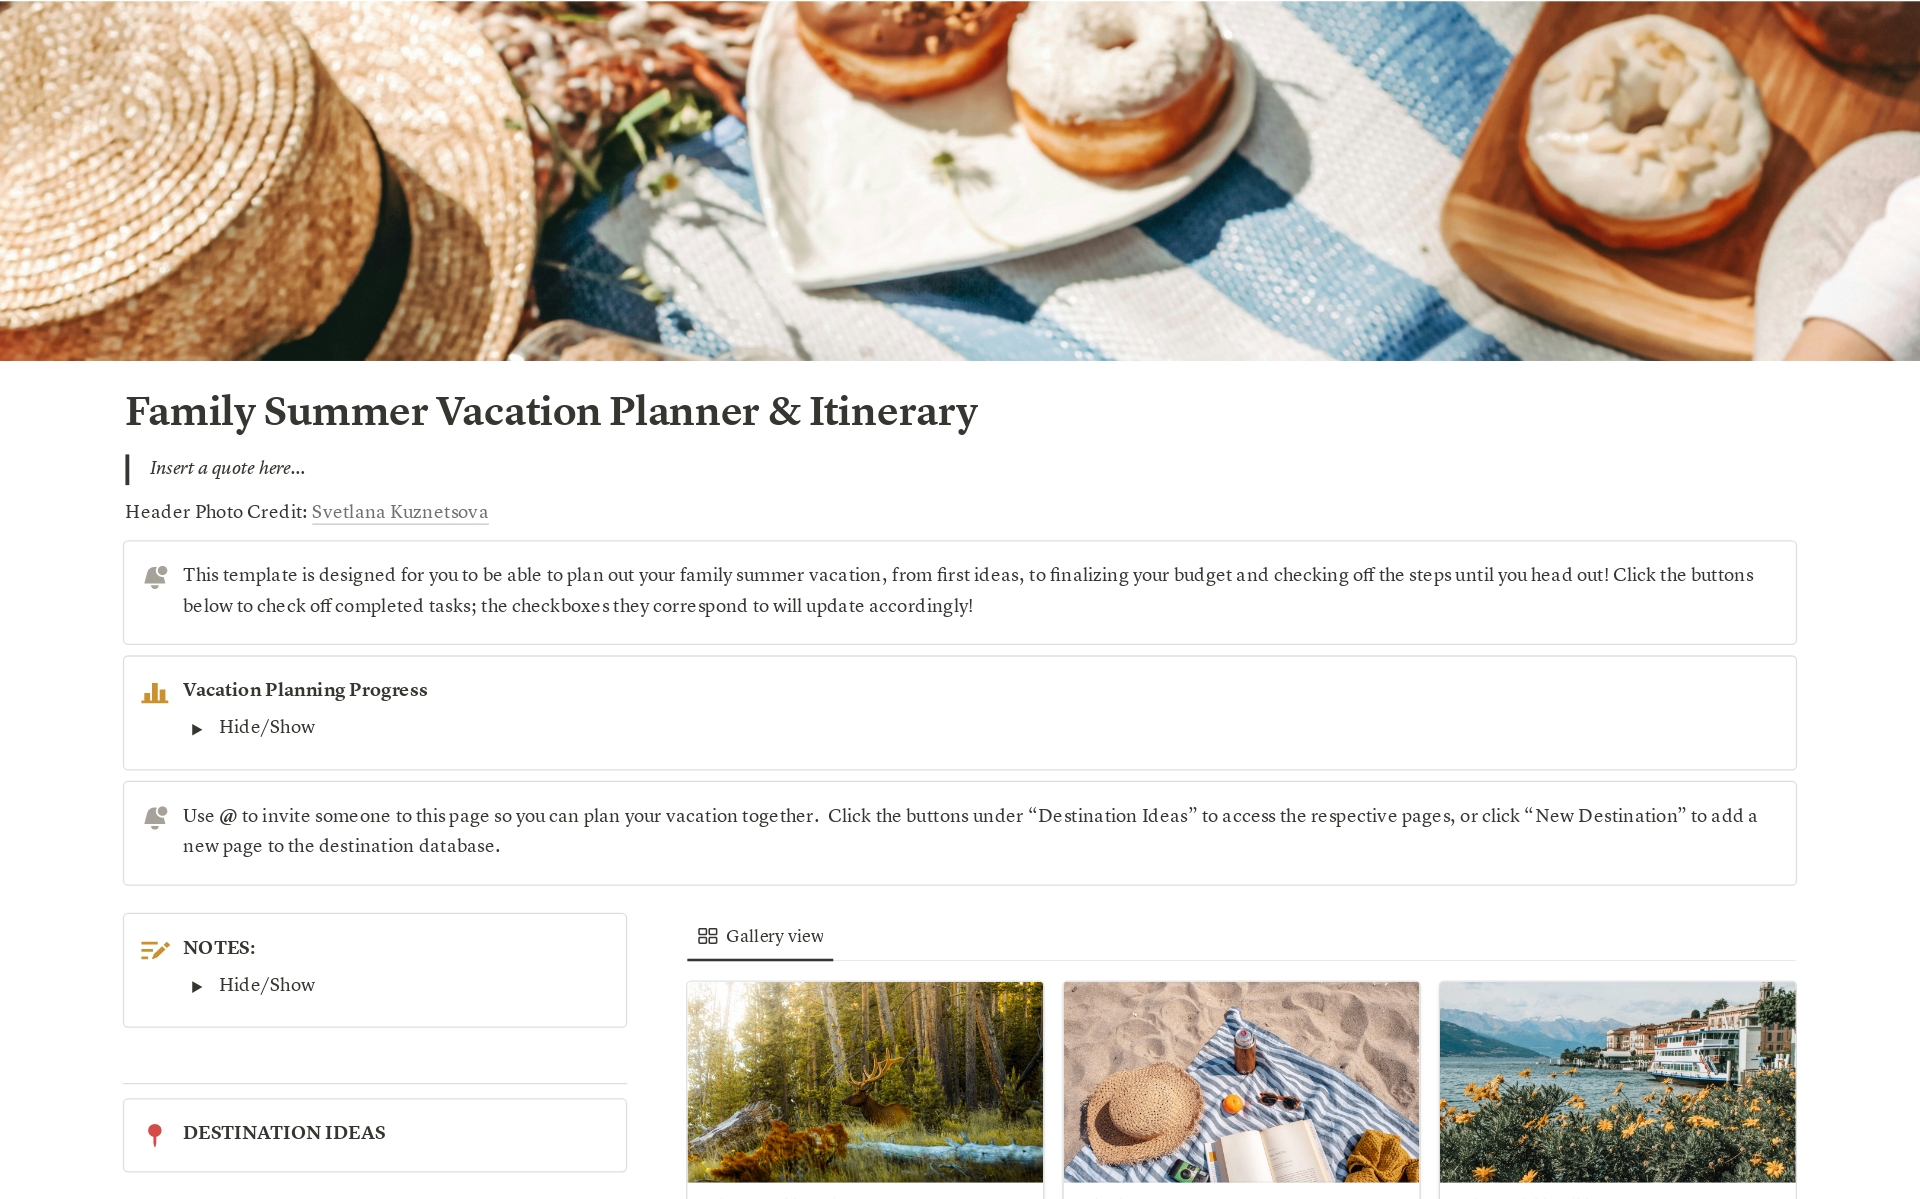 This template is designed to help you plan your family summer vacation by providing you with a planner equipped with sections for choosing your destination, writing up packing lists, a budget, and itinerary.